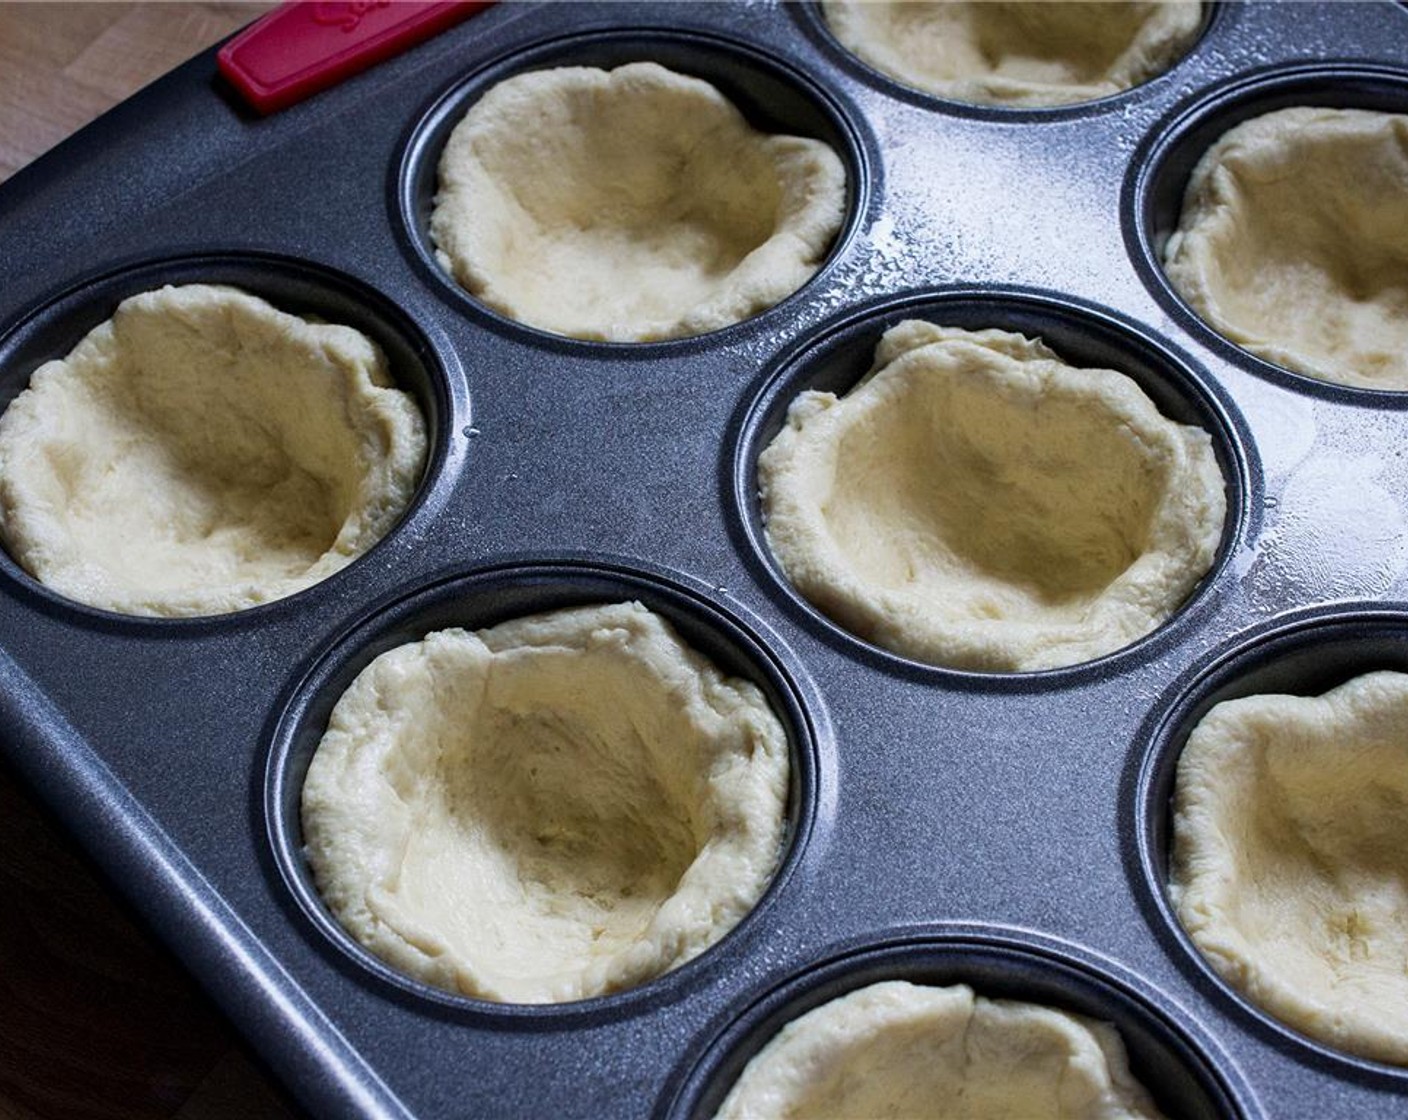 step 2 Spray muffin tins with canola oil, and flatten out each piece of the Buttermilk Biscuits (10 pieces) until it's 3 inches in diameter. Press each flattened biscuit into the muffin tin to form a cup. Bake according to directions.